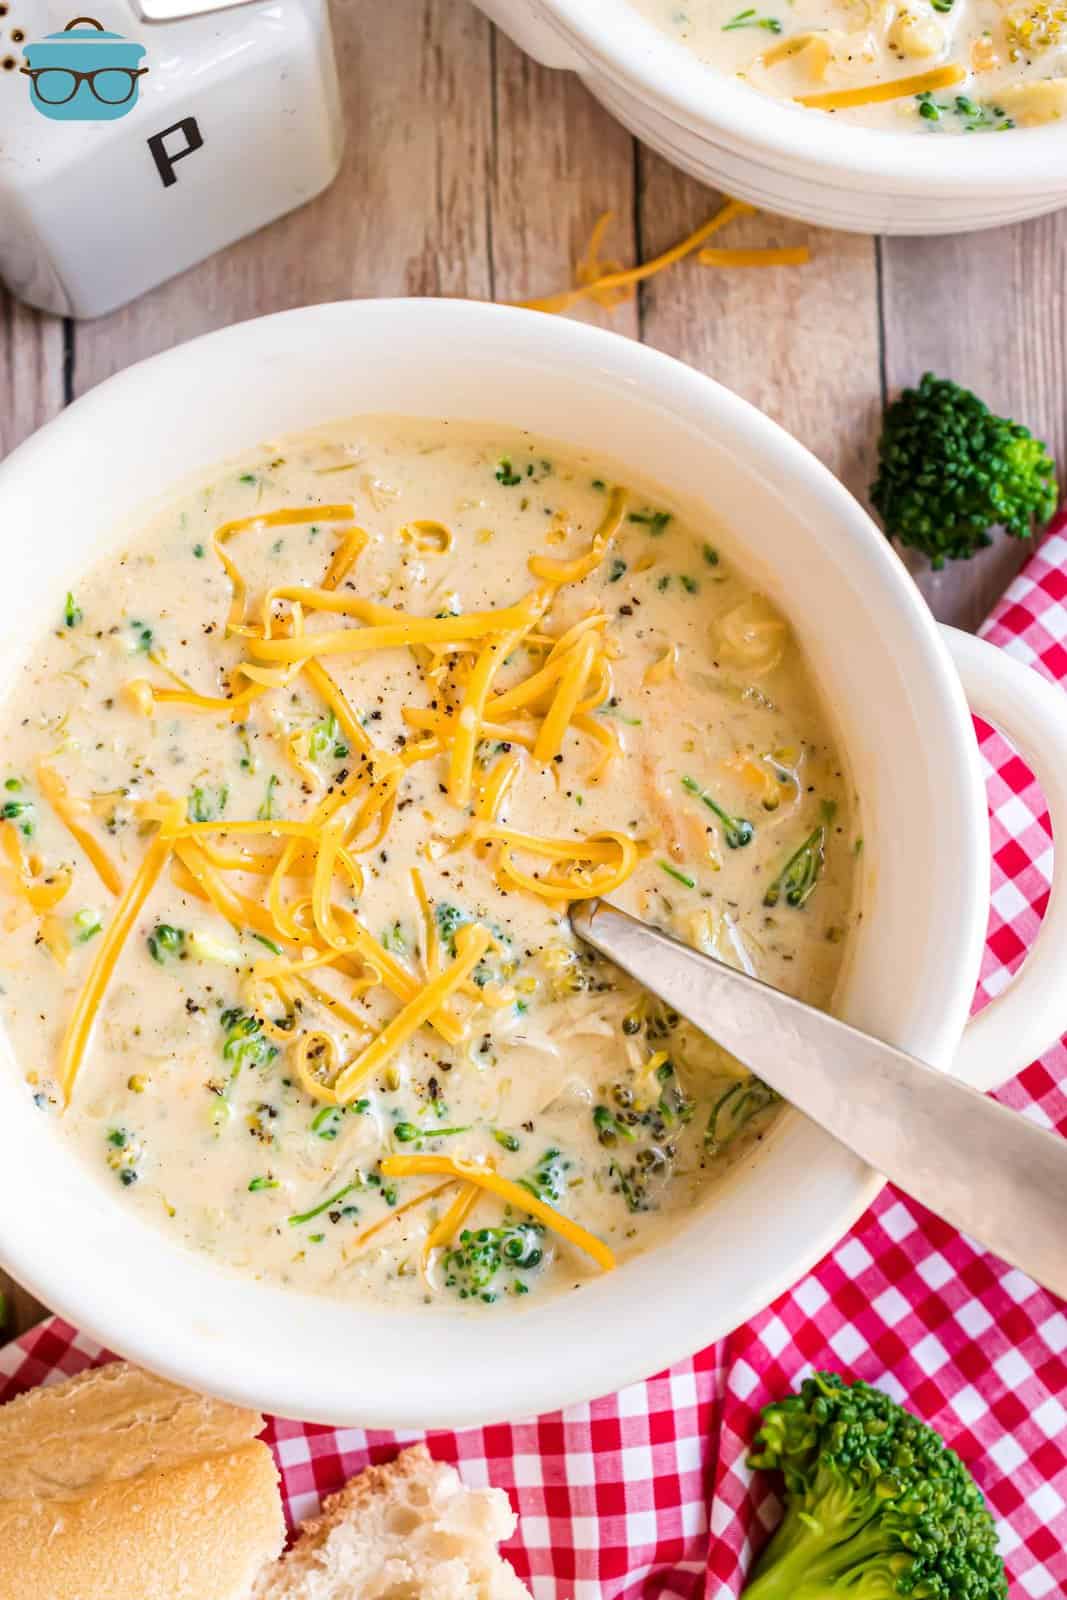 A bowl of homemade Broccoli Cheddar soup from the Slow Cooker with a spoon in it.